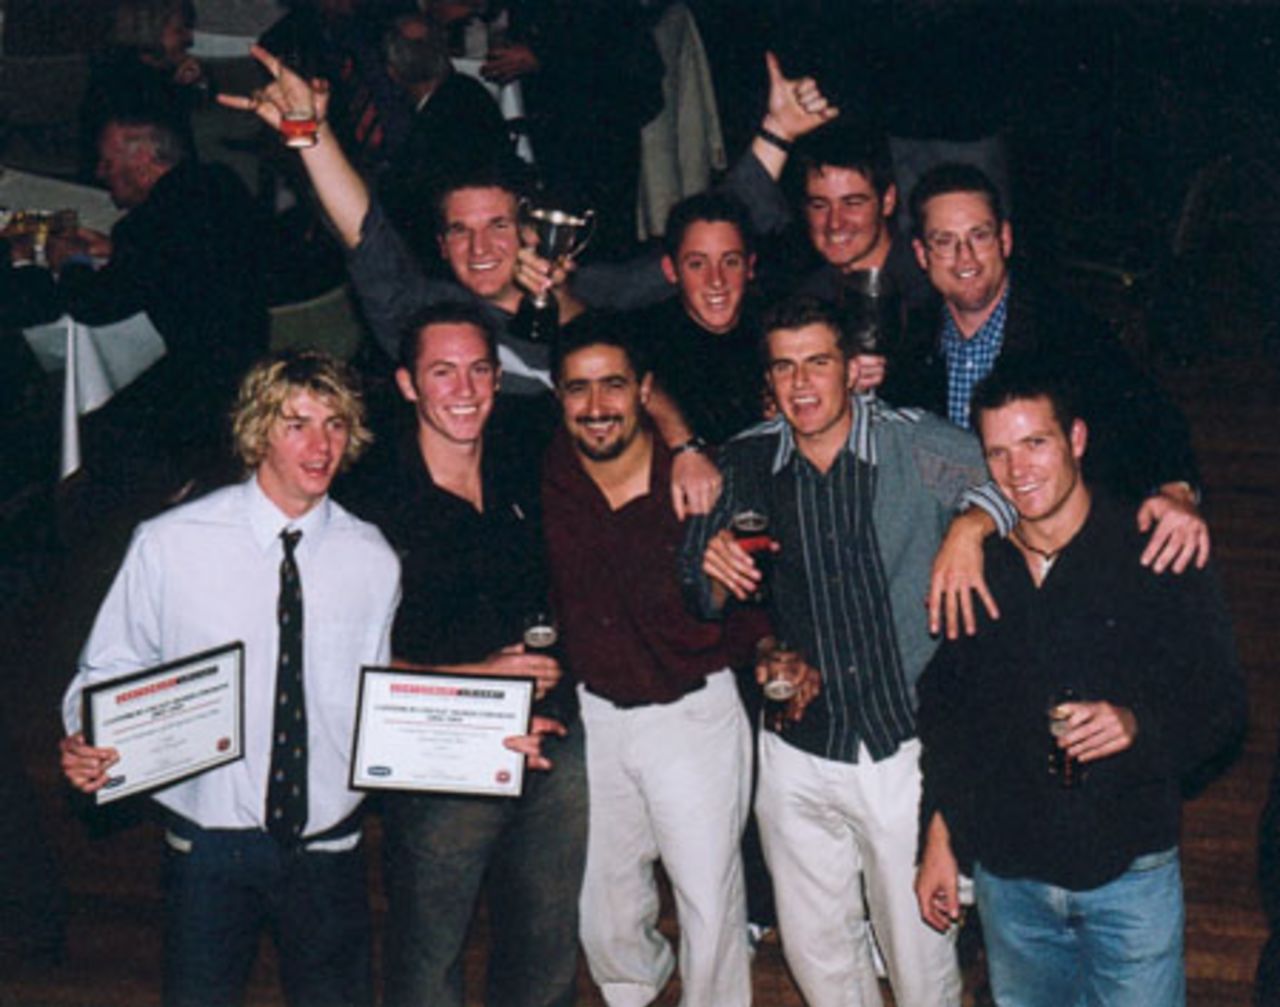 Members of the Old Collegians second grade men's team celebrate after collecting the trophies for winning the second grade one-day and two-day competitions. Canterbury Cricket Association Awards 2002/03 at the Canterbury Horticultural Society Hall at Christchurch, 10 April 2003.